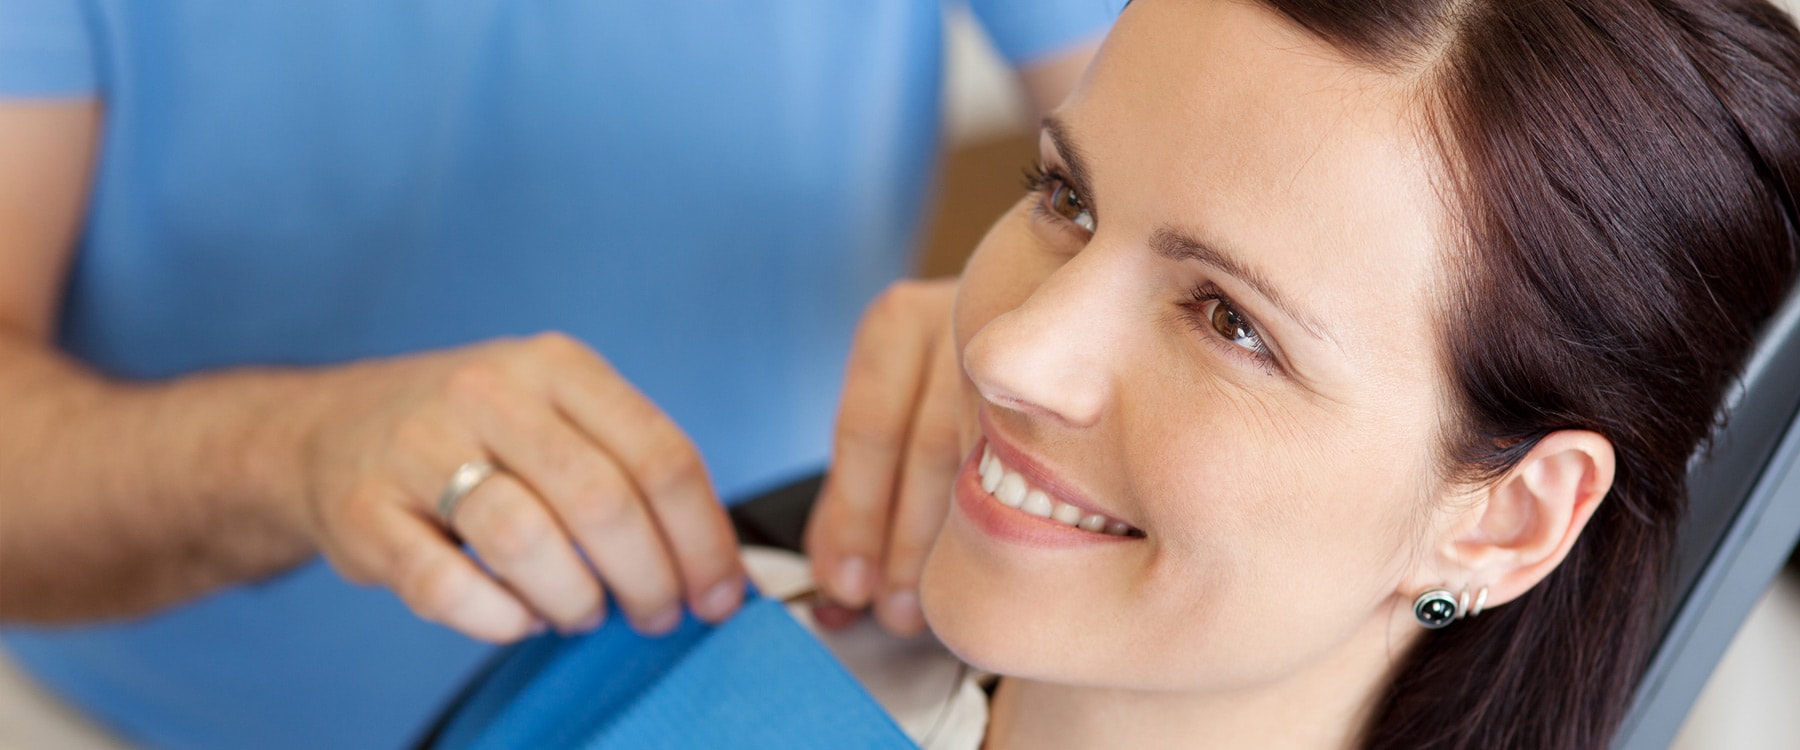 cosmetic dentistry how to improve your smile